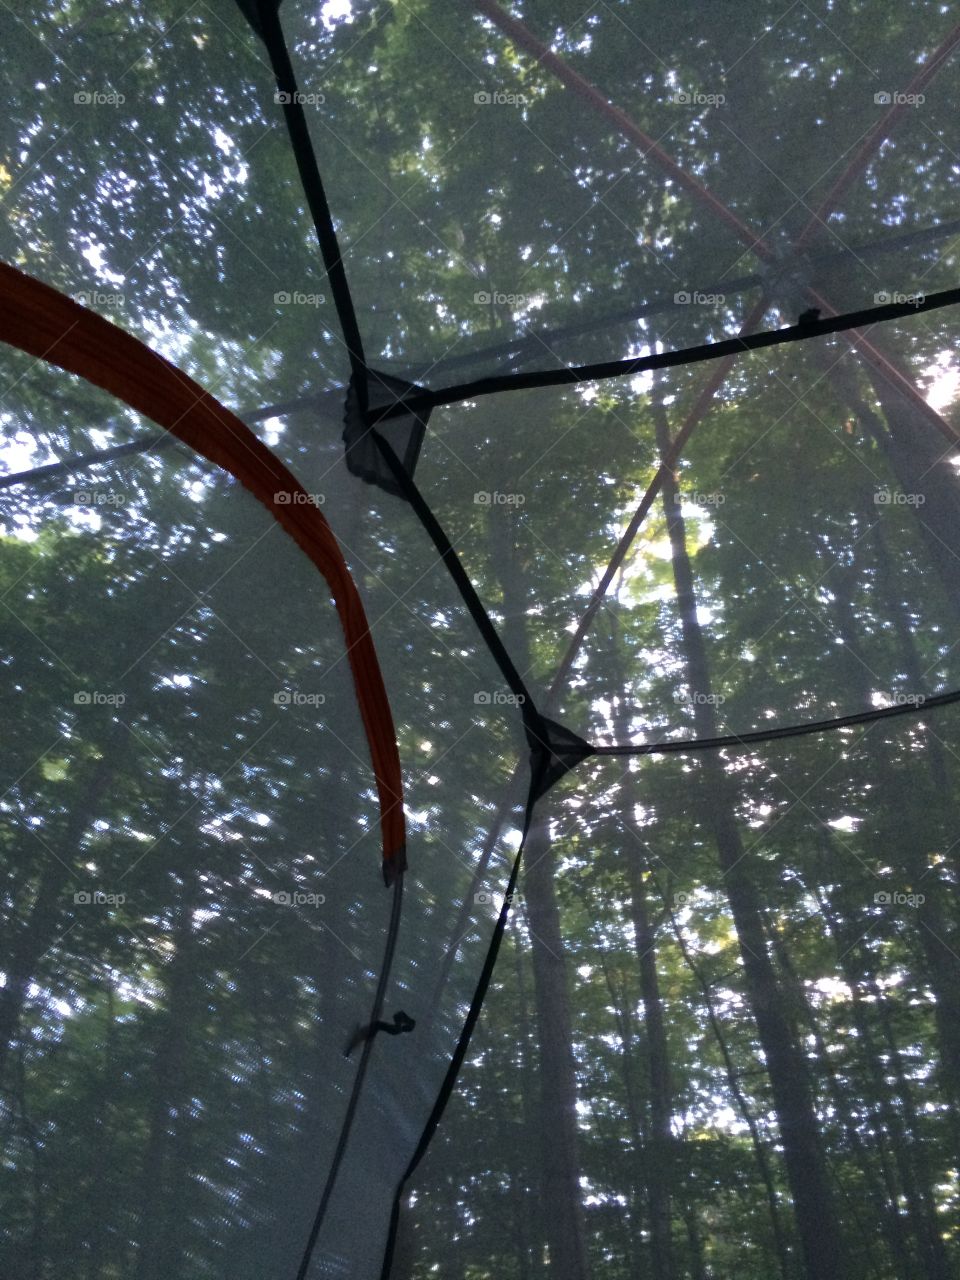 Waking up to see the canopy through the tent